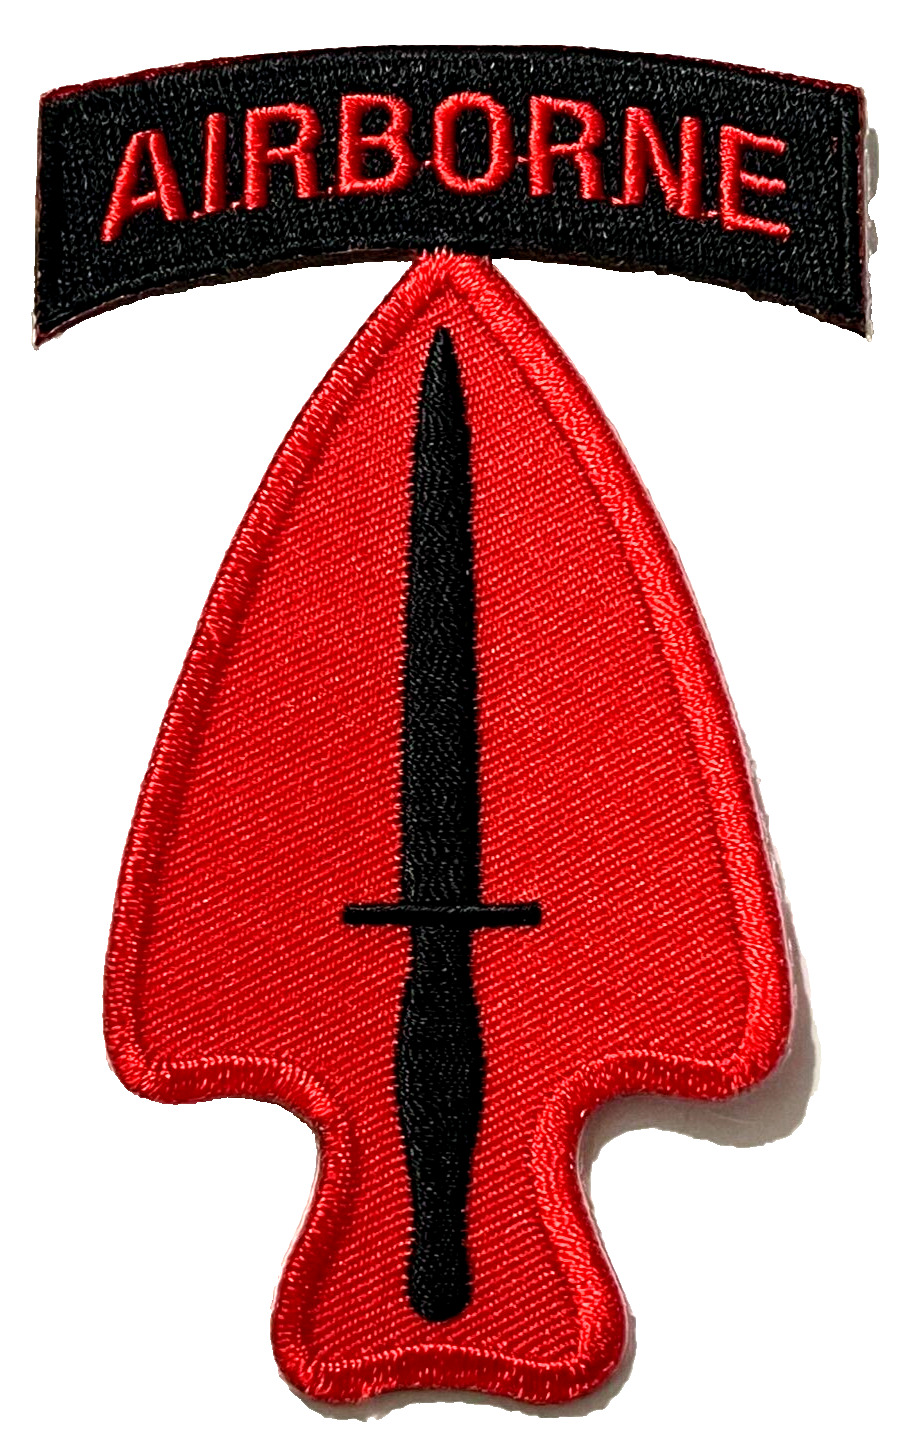 US ARMY 1st SPECIAL FORCES OPERATIONAL DETACHMENT-DELTA (AIRBORNE) PATCH (USA-5)